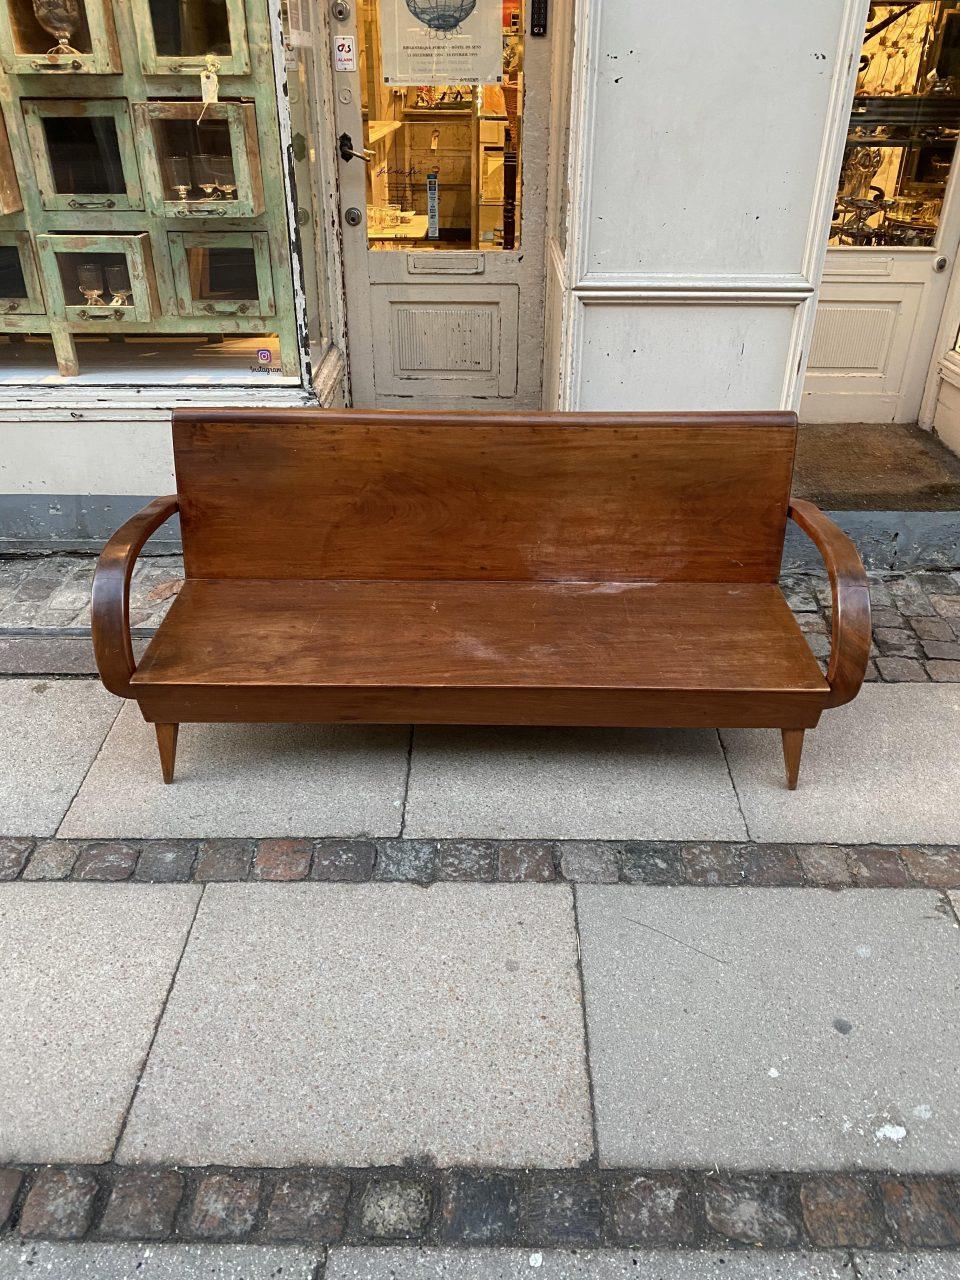 Lovely vintage eye-catching wooden bench / sofa in a fantastic Art Deco design and from circa 1930-1950. Stylewise a likeness to the universe of renowned French designer, Jean Prouvé.

This midcentury French piece is solidly crafted in lacquered